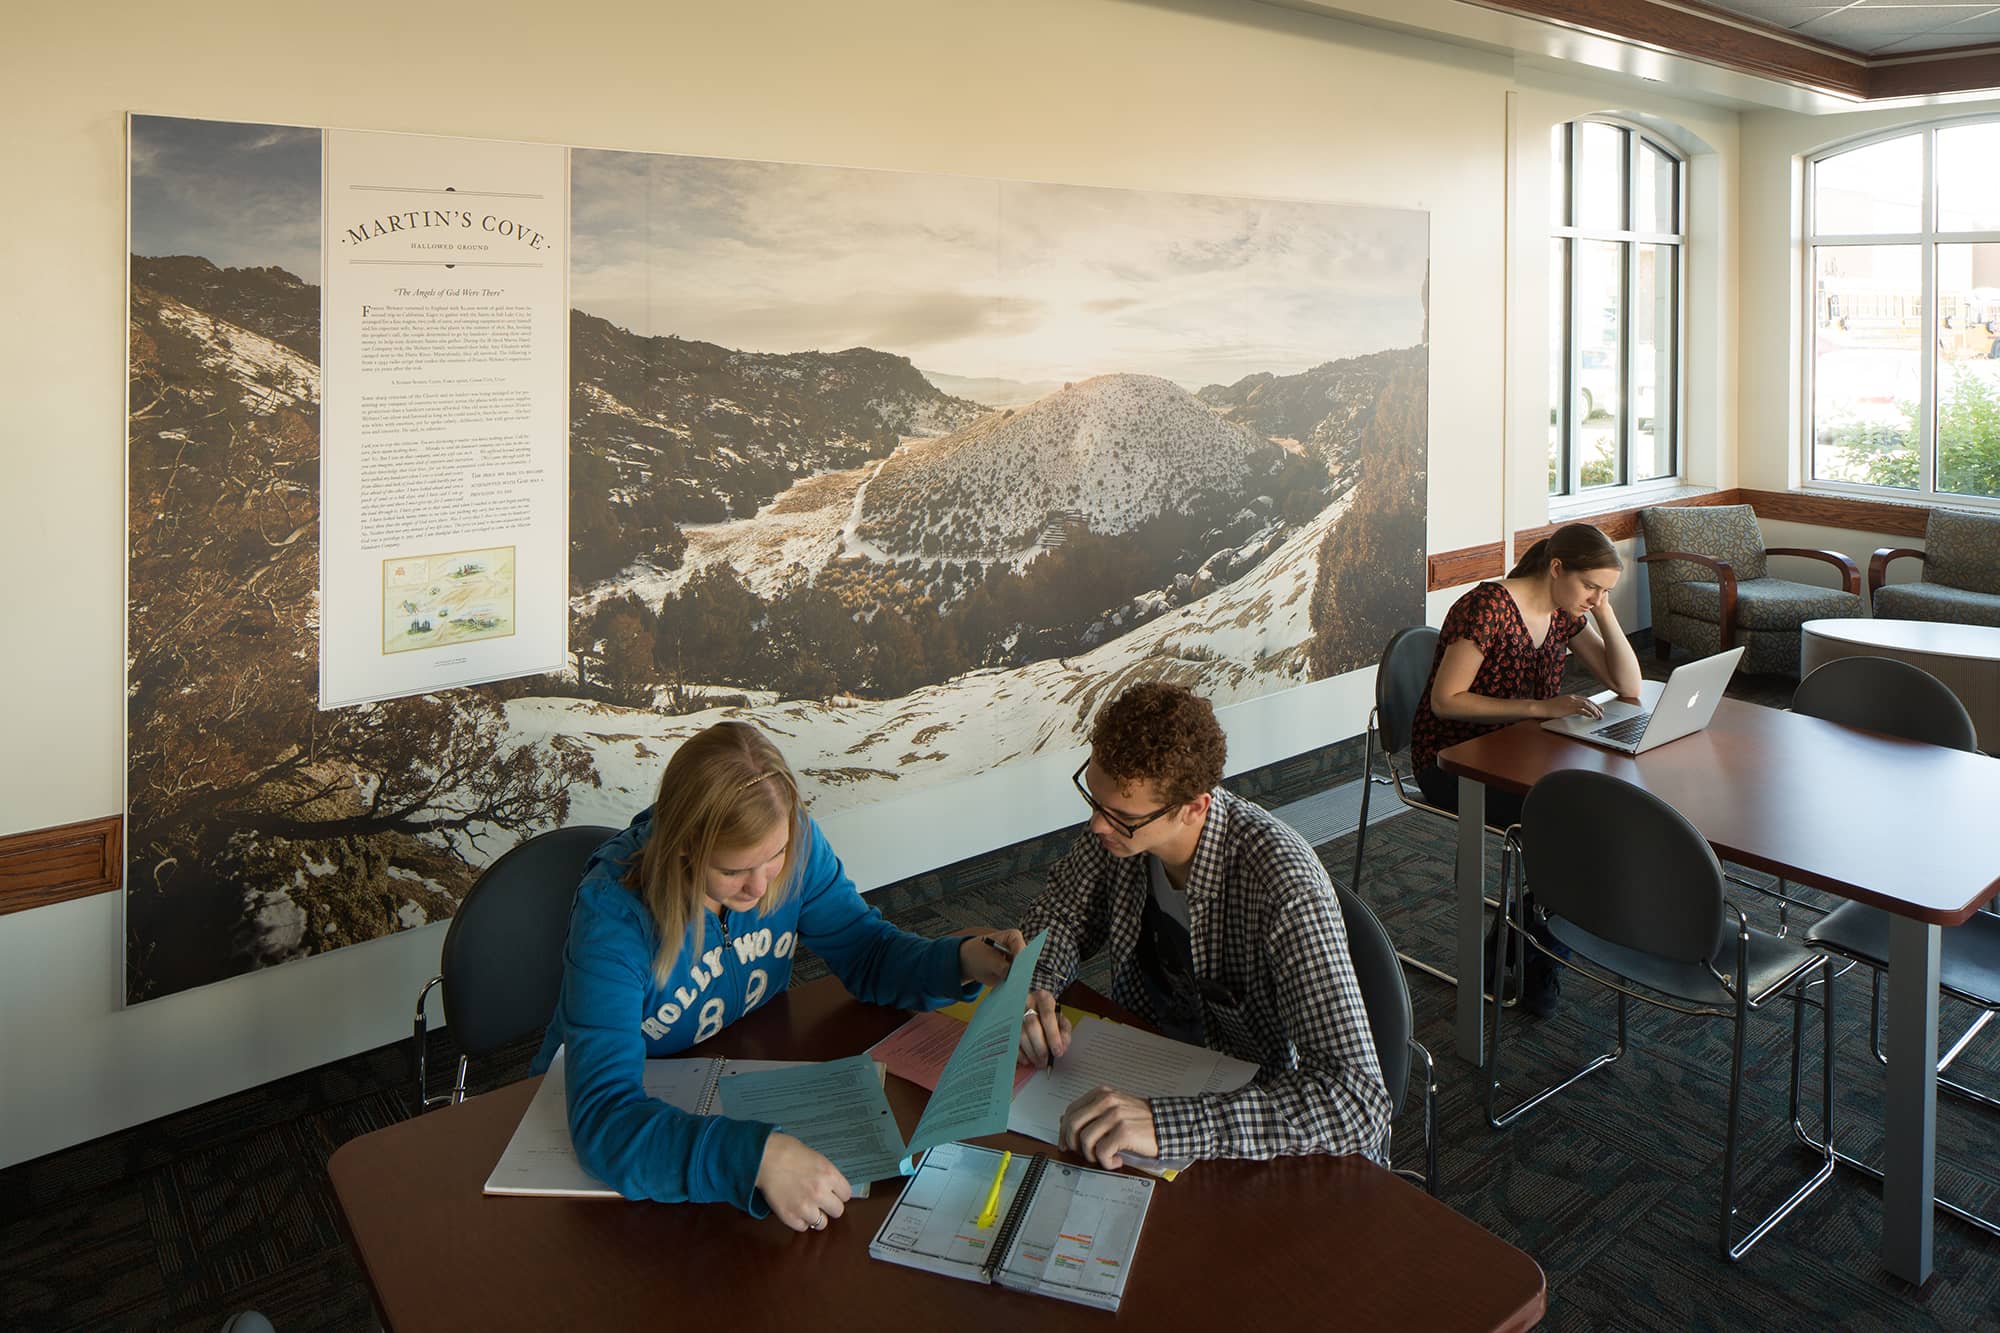 Two students sit at a table studying in front of a mural of Martin's Cove in BYU's Heritage Halls.